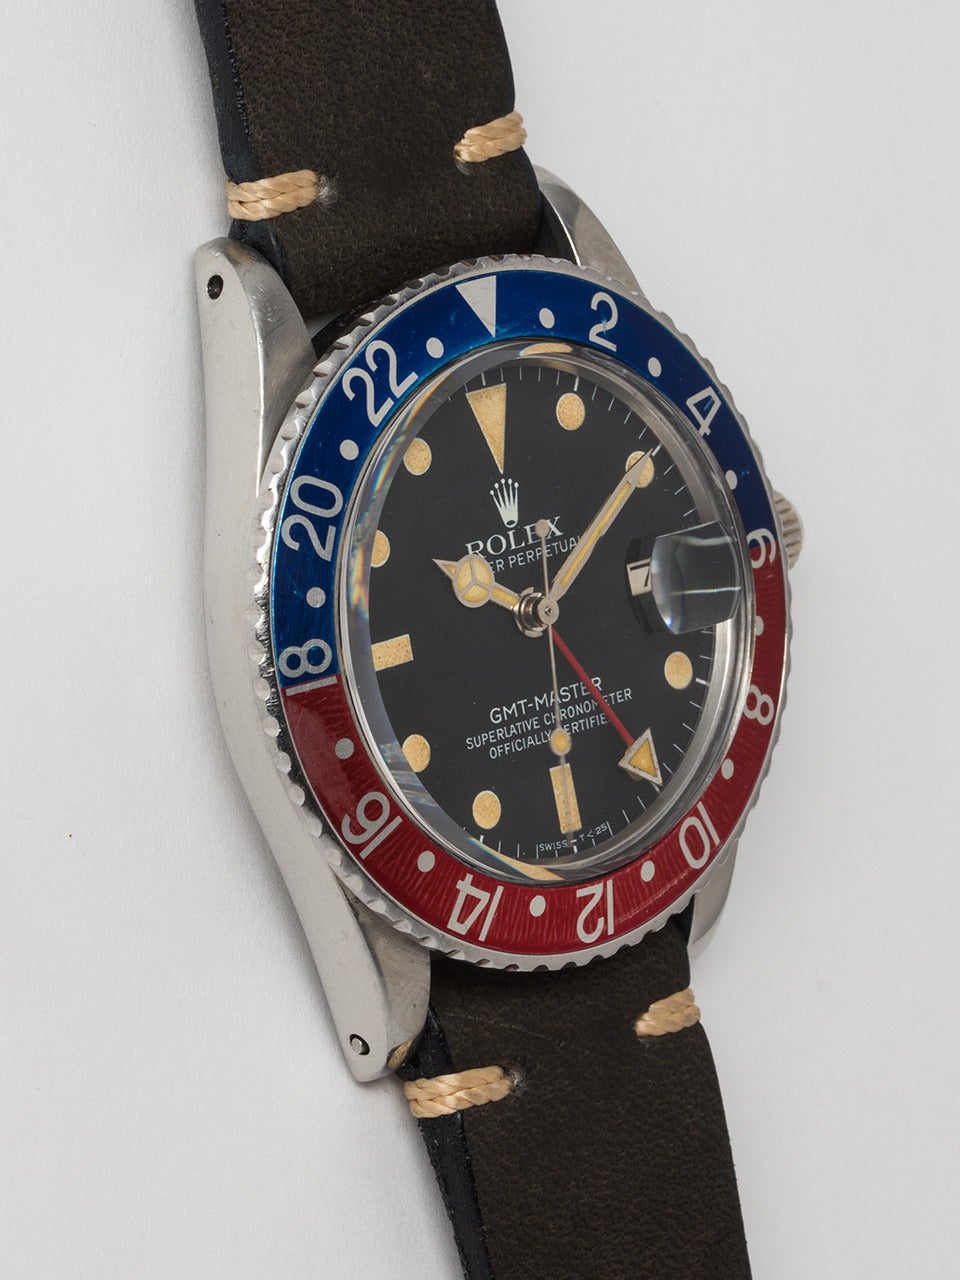 Rolex Stainless Steel GMT-Master Wristwatch ref 16750 serial# 6.6 million circa 1981. 40mm diameter case with 24 hour lightly faded red and blue so called Pepsi bezel. Gorgeous original matte black dial with unusually richly patina'd luminous